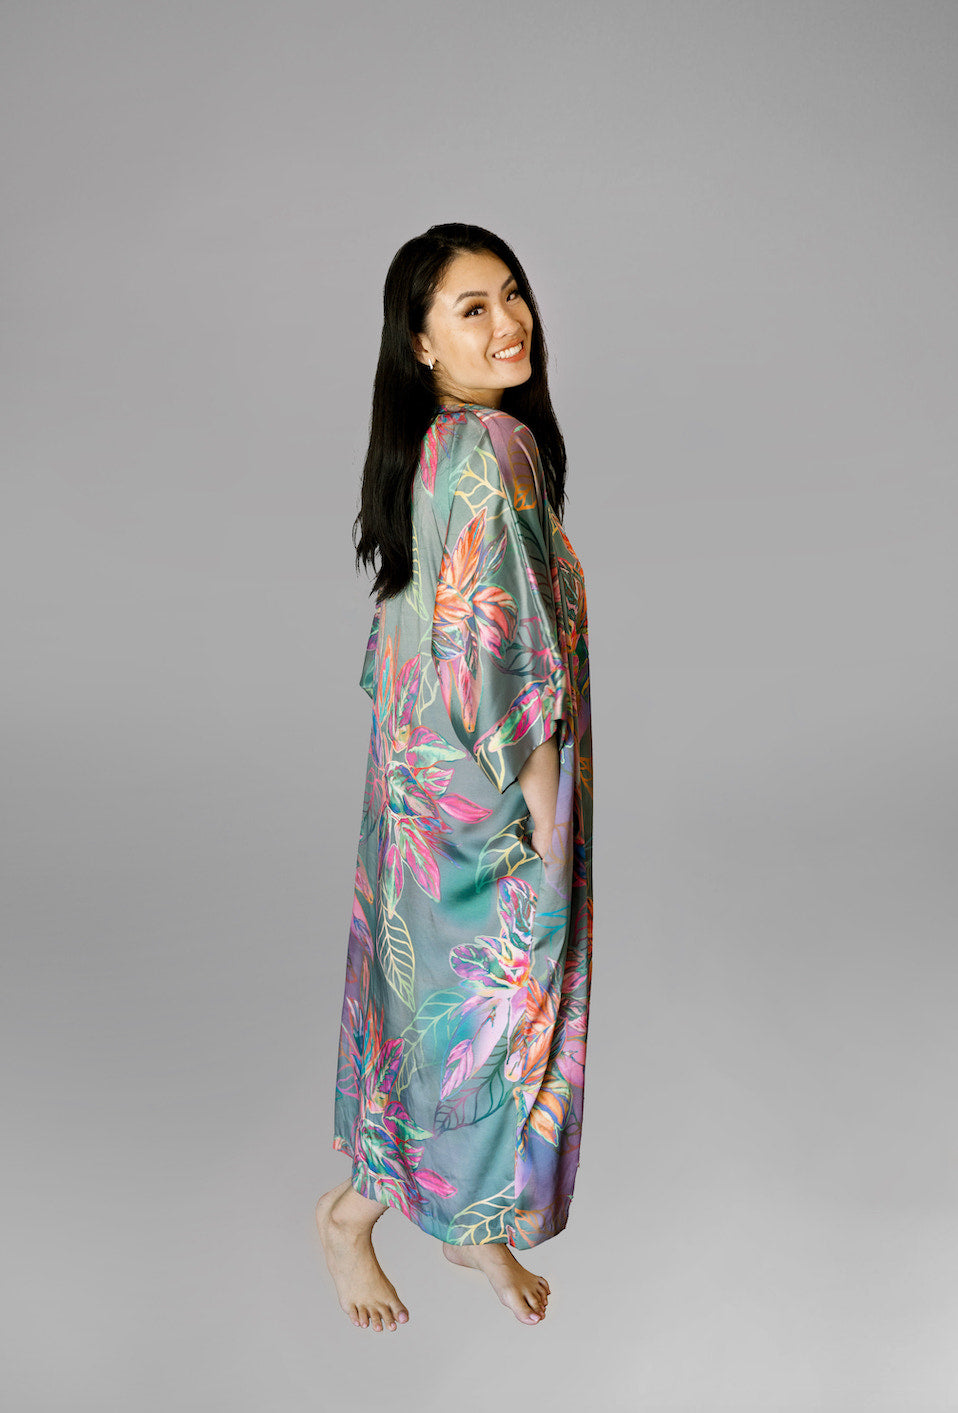 Woman wearing kimono robe in Carmen back profile view with hands at her side